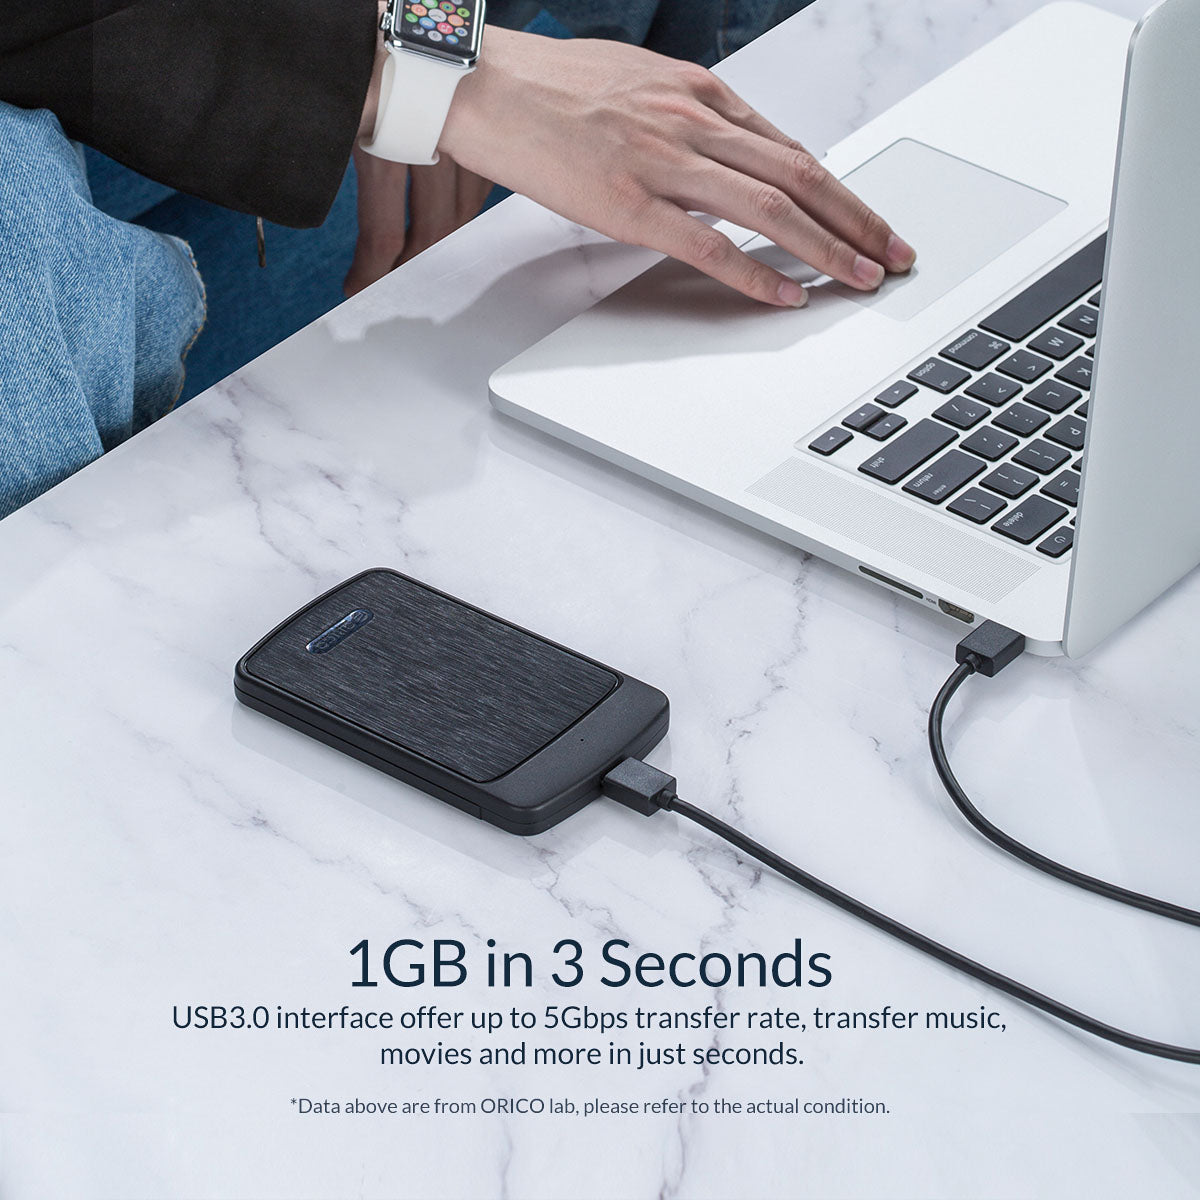 ORICO 2.5" SATA 3.0 USB 3.0 Micro-B HDD Hard Drive Enclosure with 5Gbps Transfer Rate and 4TB Max Support Capacity, Auto Sleep Mode and UASP for PC Desktop Computer Laptop | 2020U3